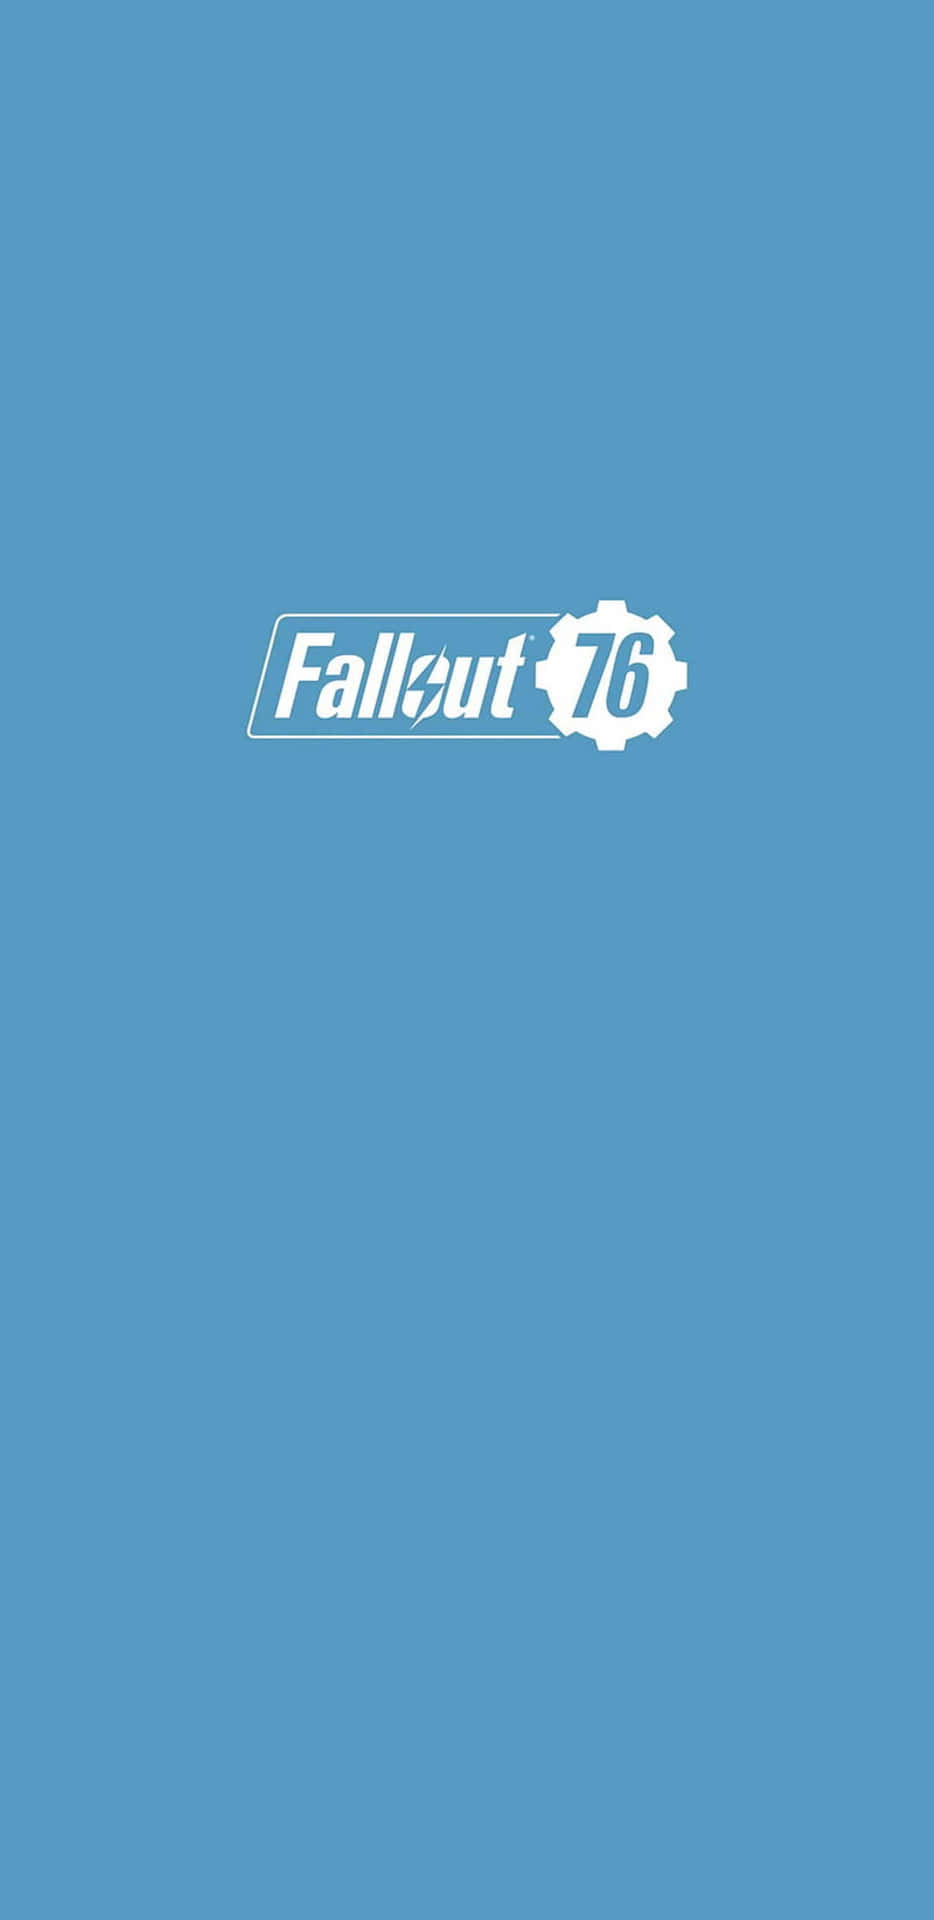 Download Pixel 3xl Fallout 76 Background 1440 X 2960 | Wallpapers.com